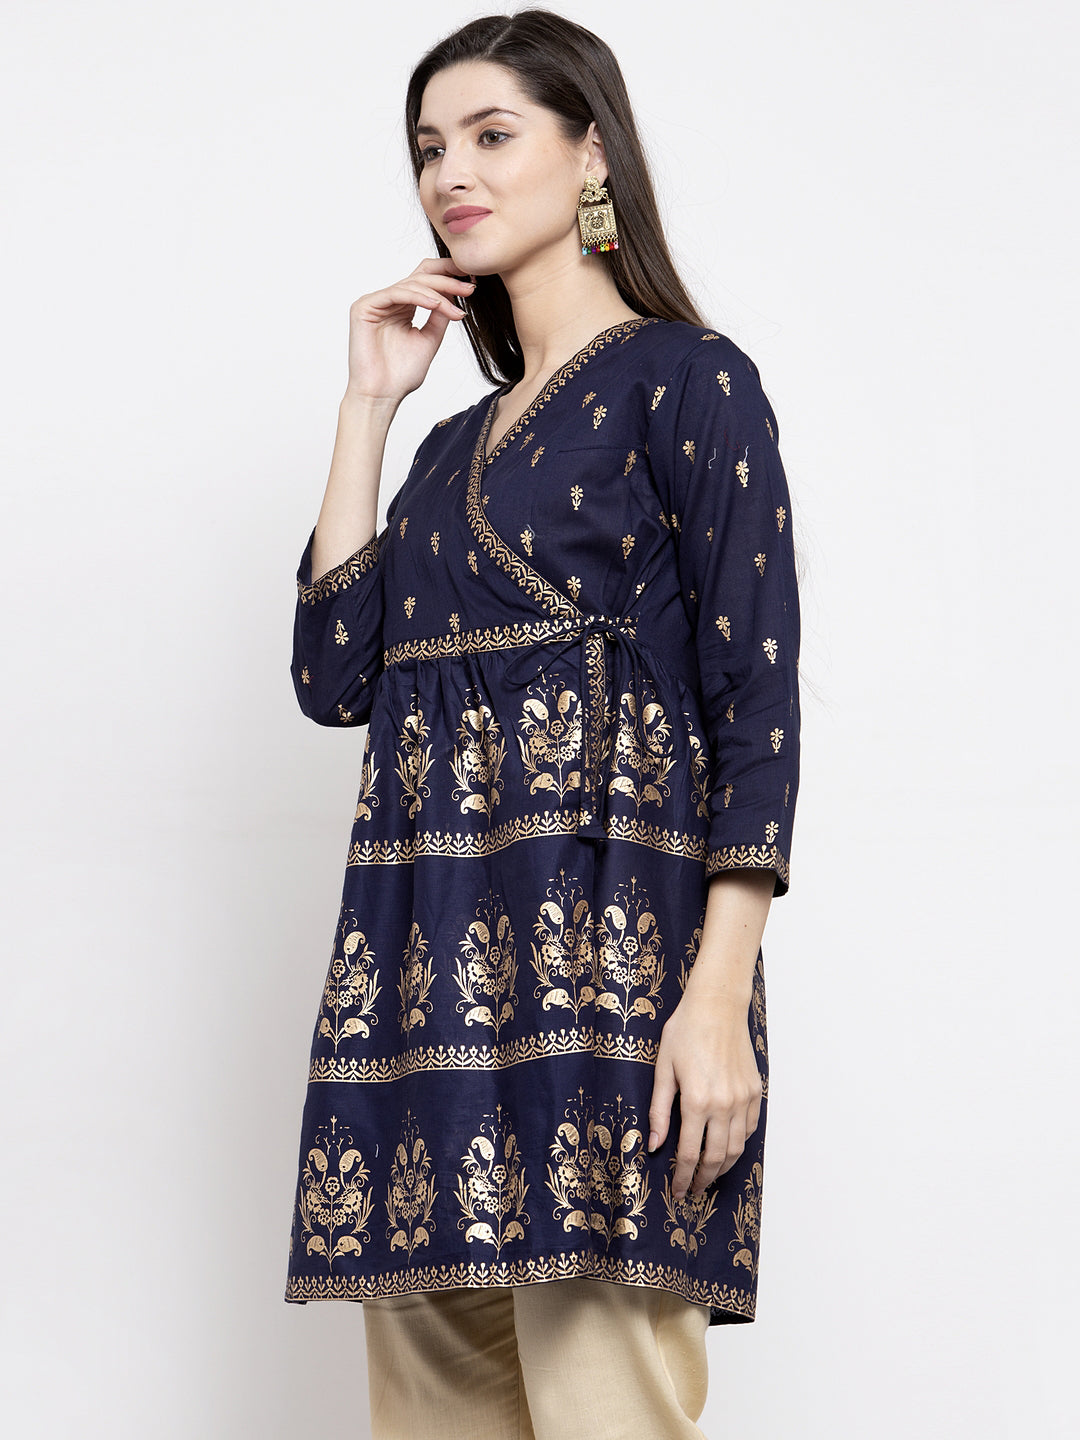 Bhama Cuture Navy Blue & Golden Foil Printed Tunic